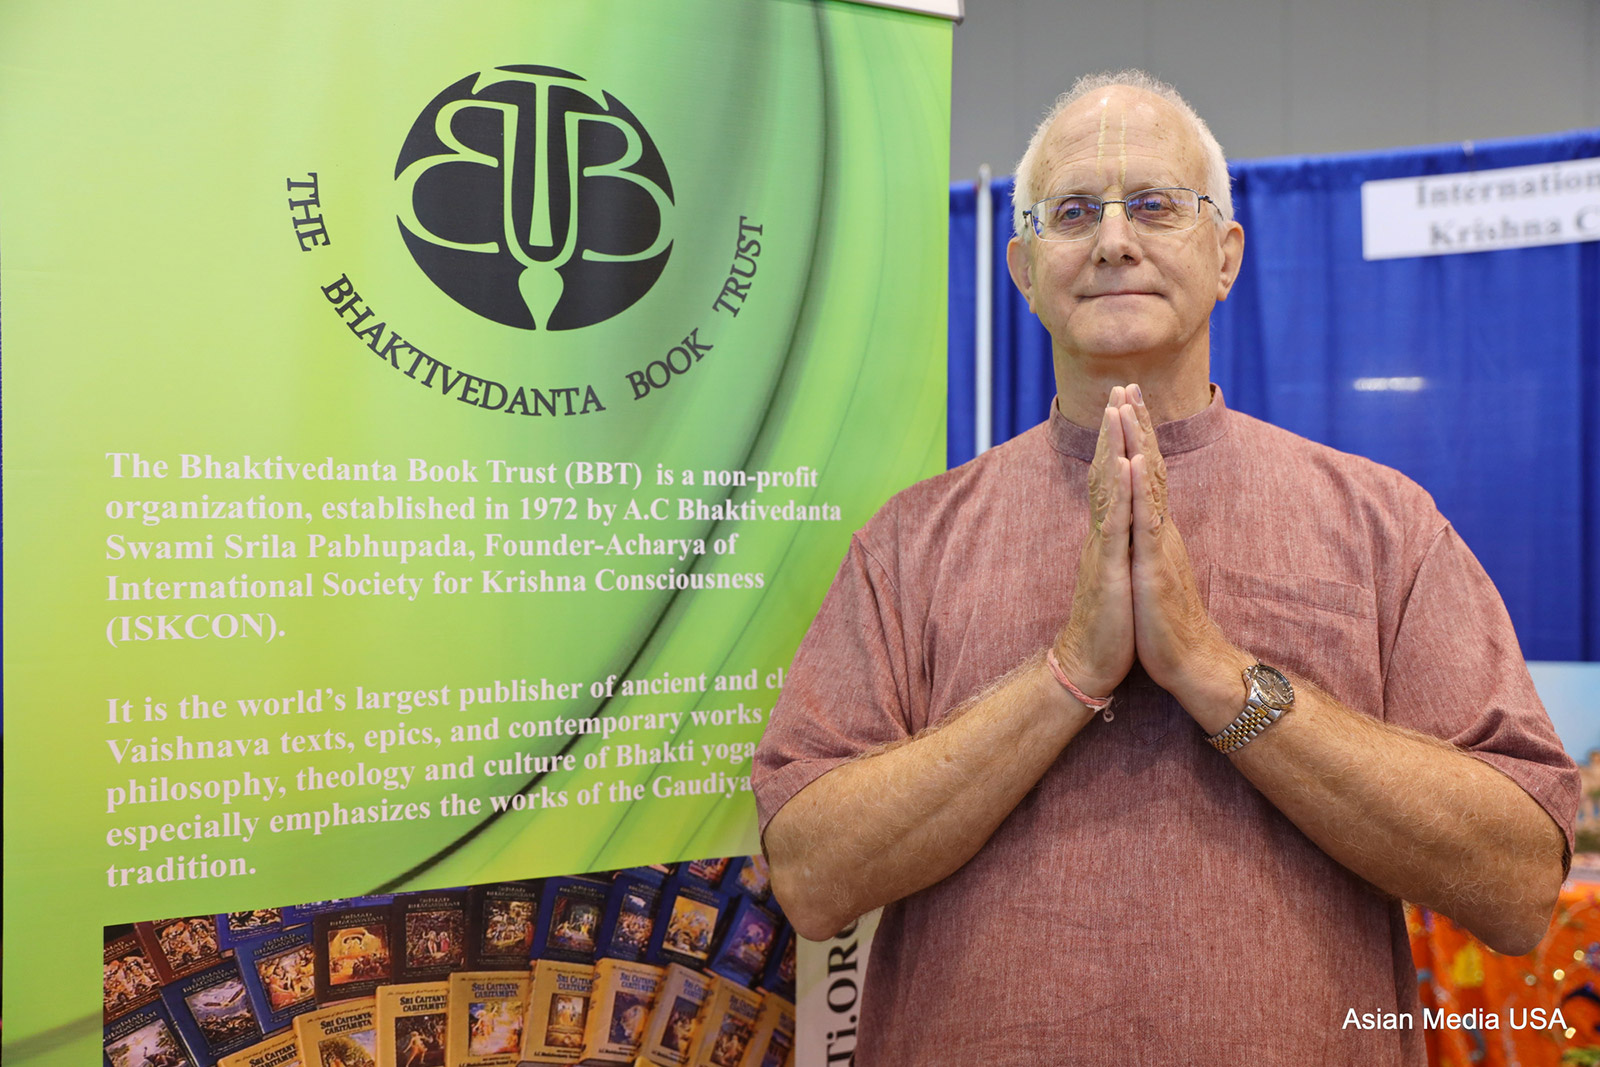 Anuttama Dasa, the Global Director of Communications for the International Society for Krishna Consciousness, “Urged world leaders to take responsibility to bring the change” at Parliament of the World’s Religions.